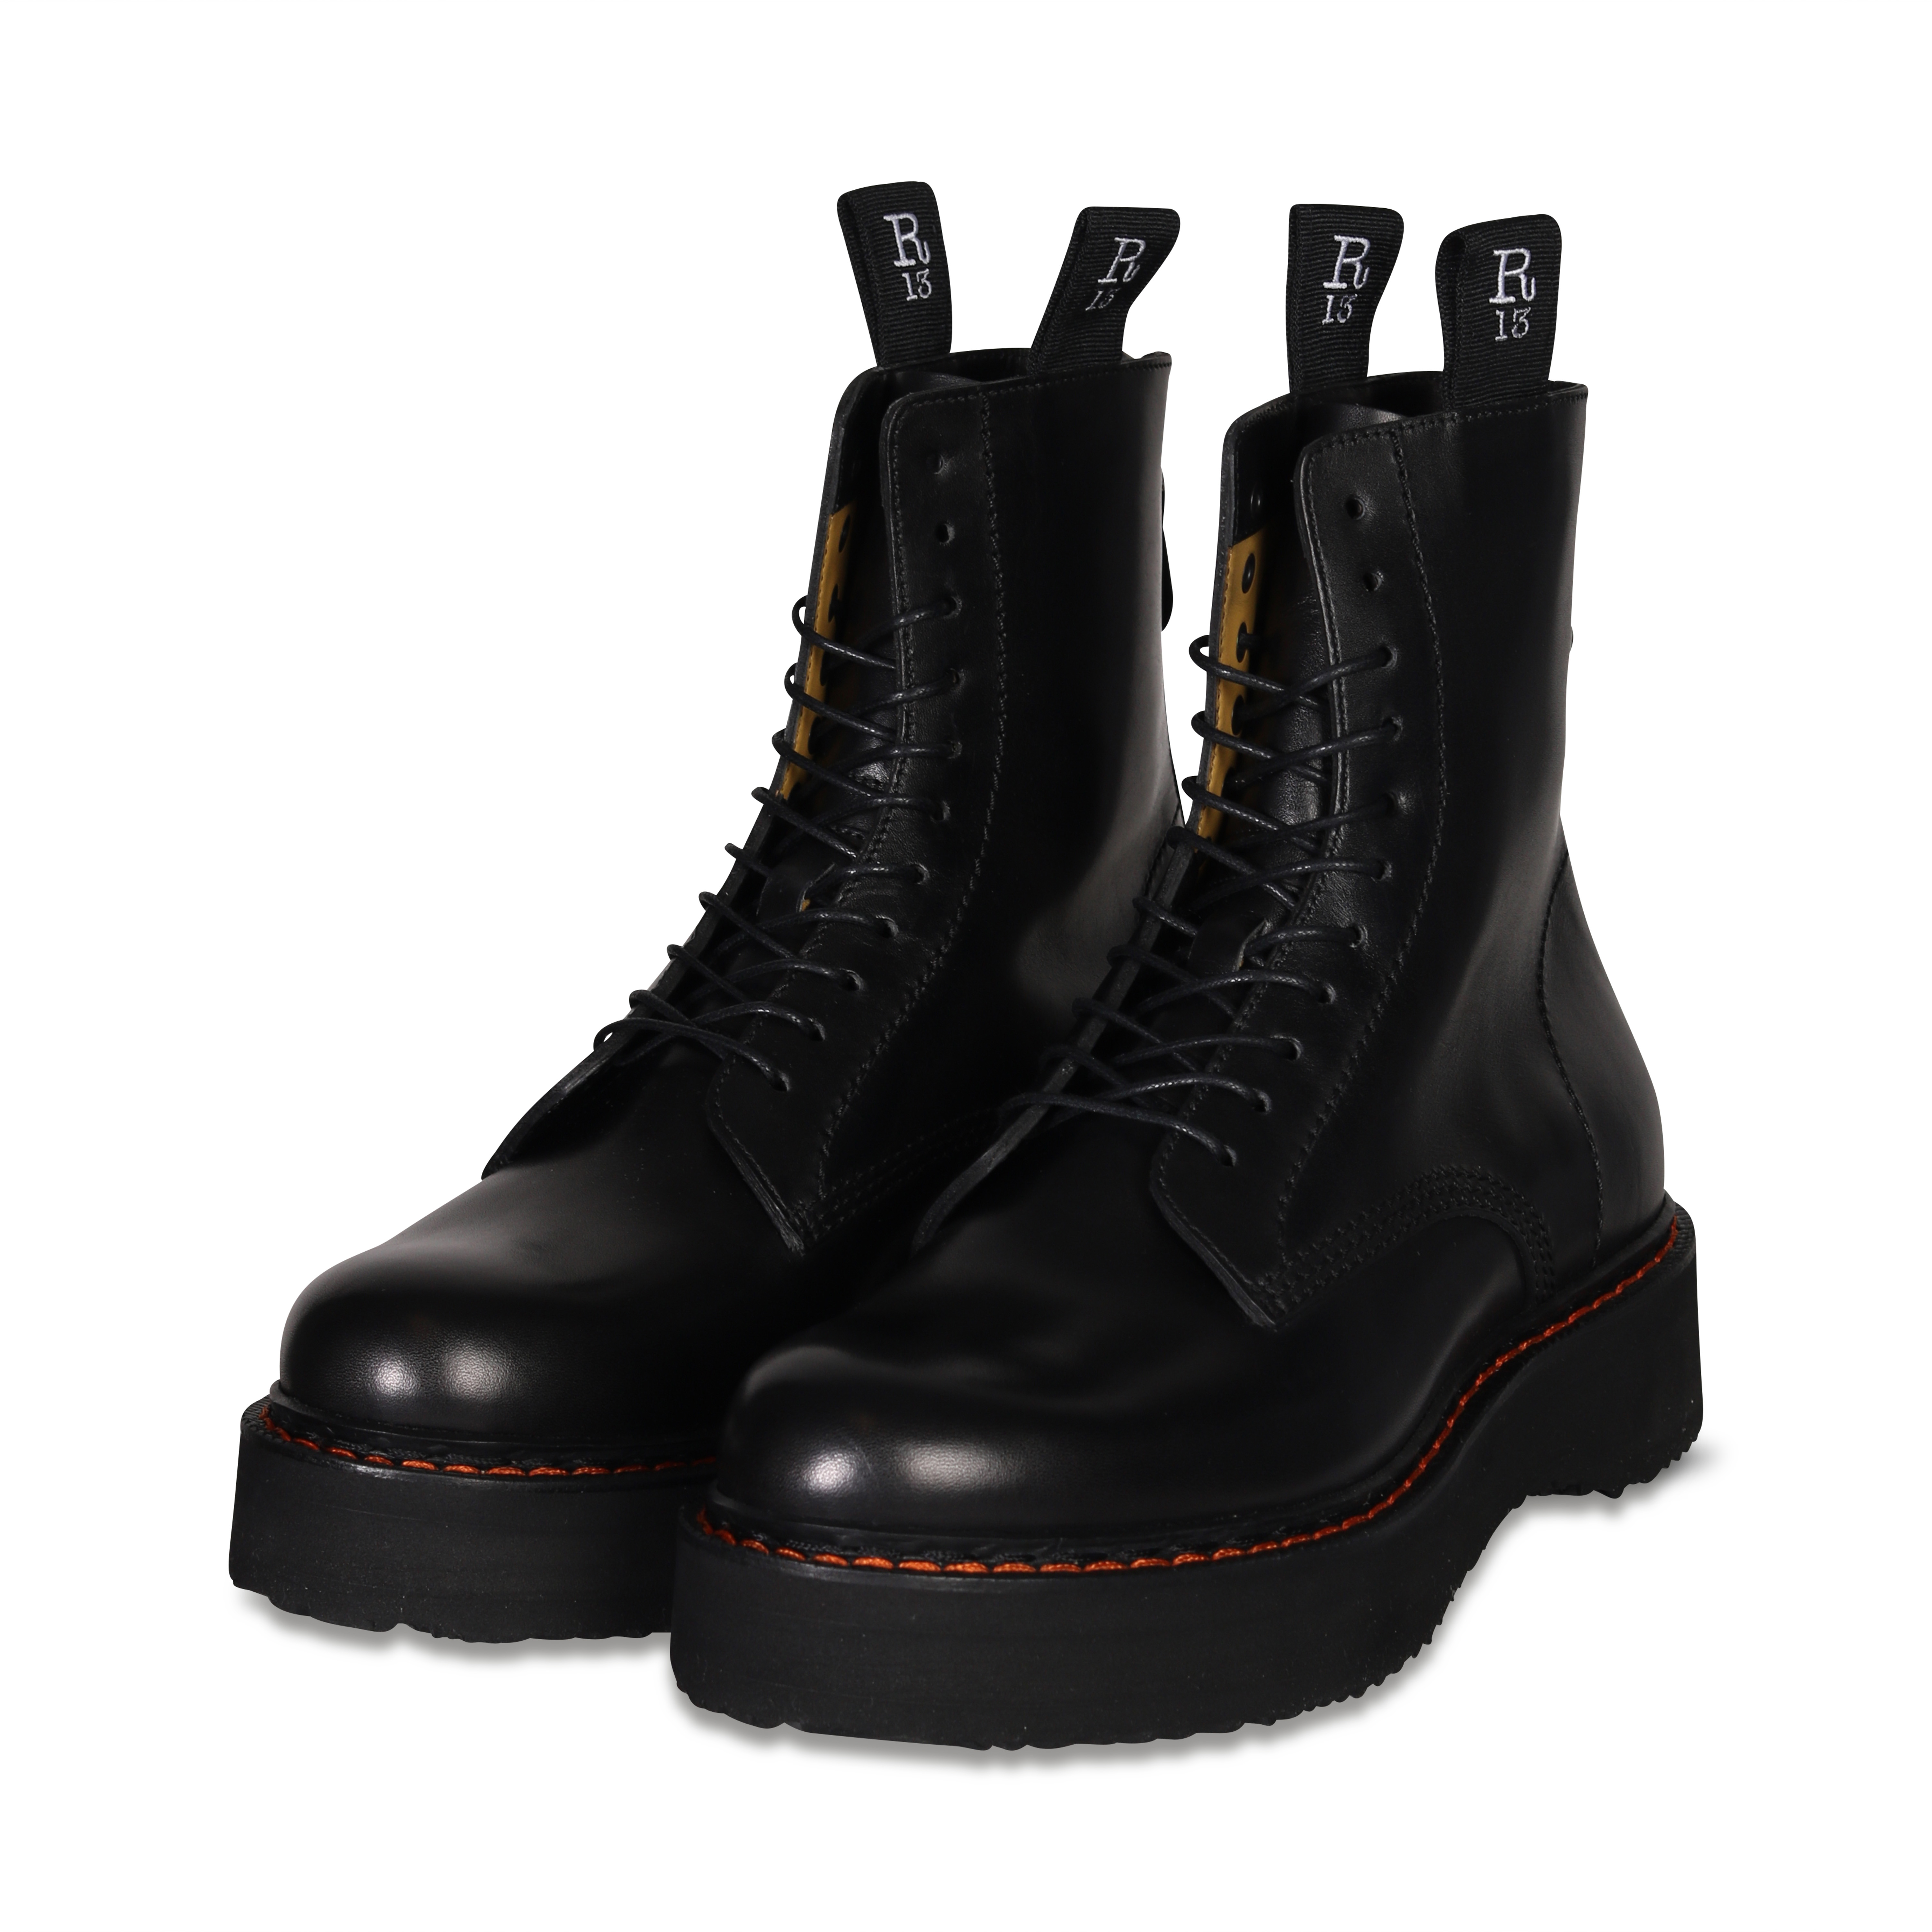 R13 Stack Boots in Black 43